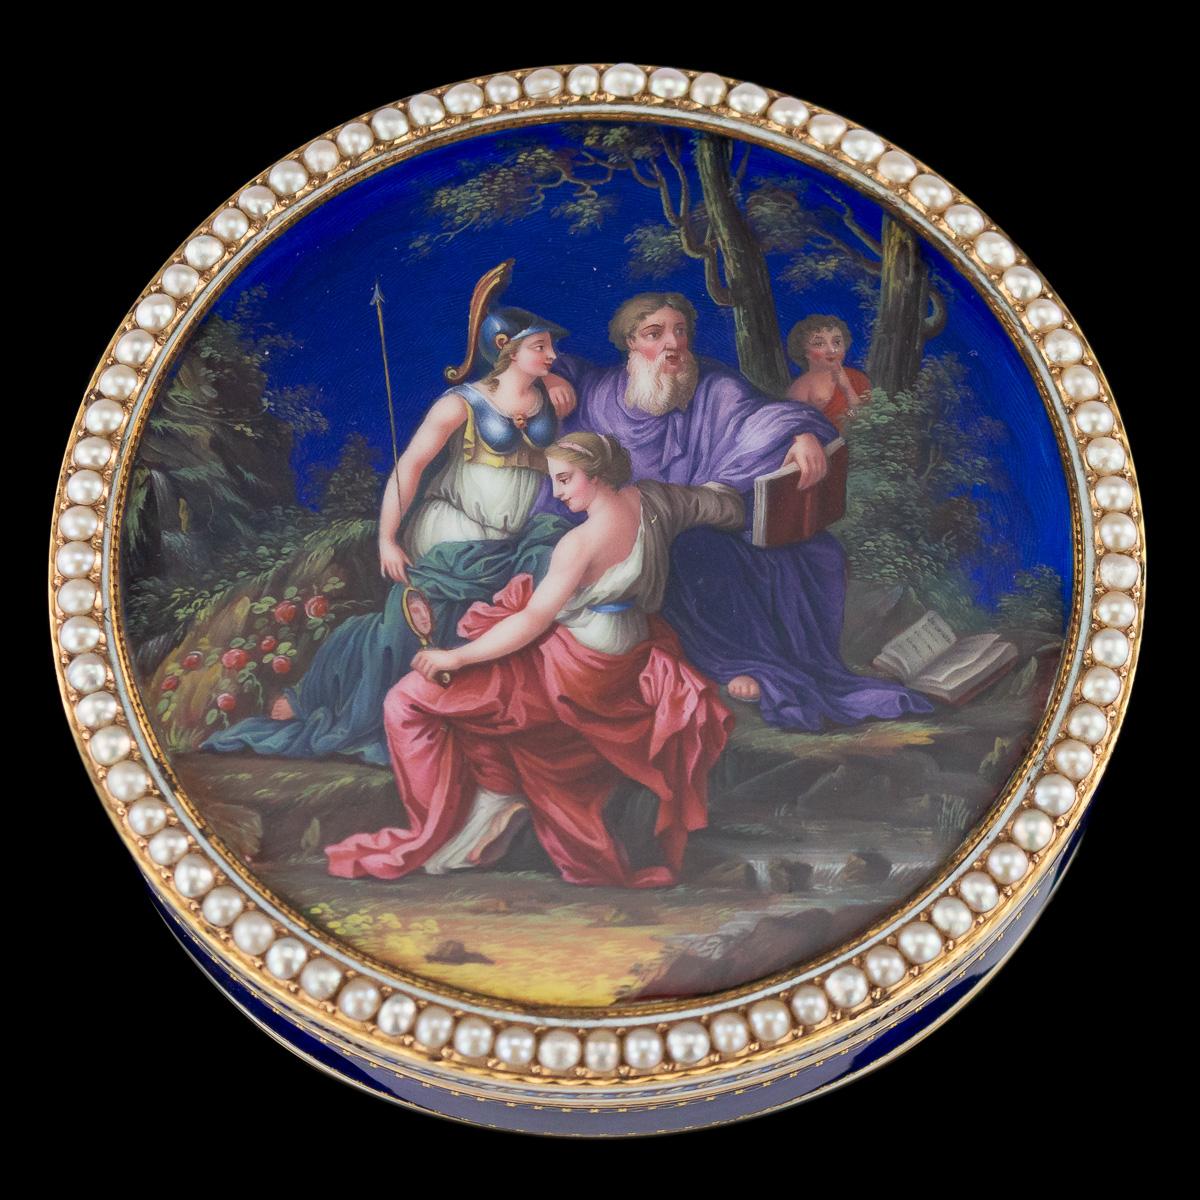 Antique late 18th century exceptional Swiss 18-karat gold and enamel snuff box, of round shape, the cover finely painted with the scene of The Choice of Hercules, the boy Hercules is concealed within trees observing Virtue and Vice whilst the poet